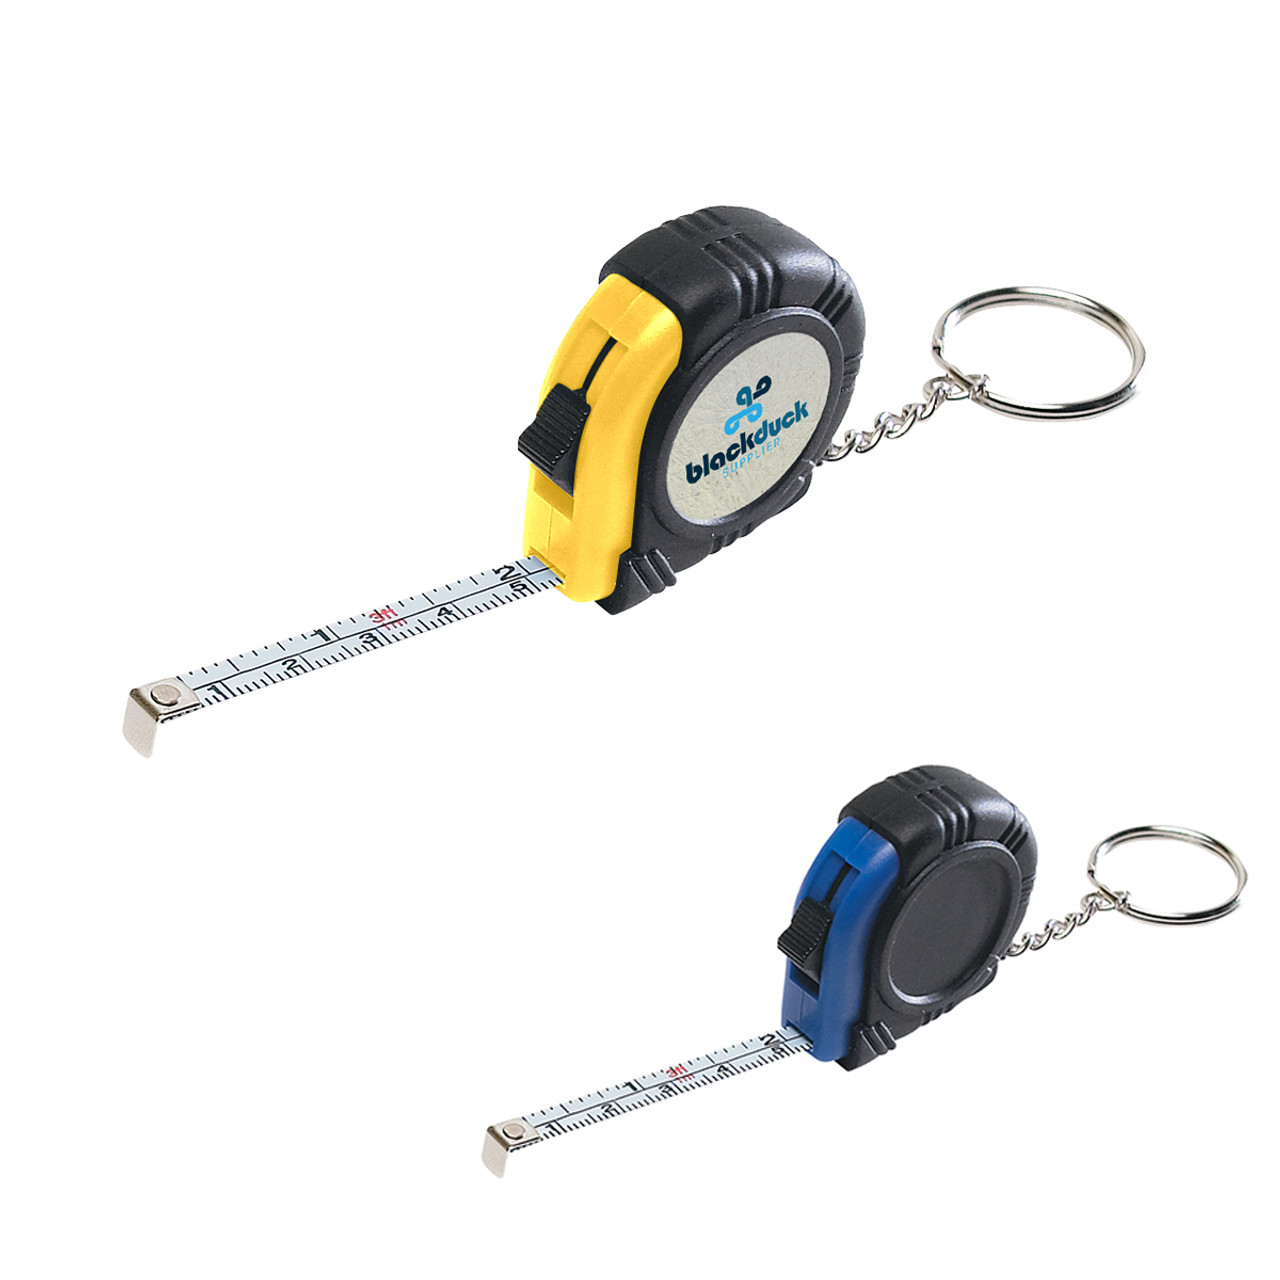 Custom Rubber Tape Measure Key Tag With Laminated Label 7313